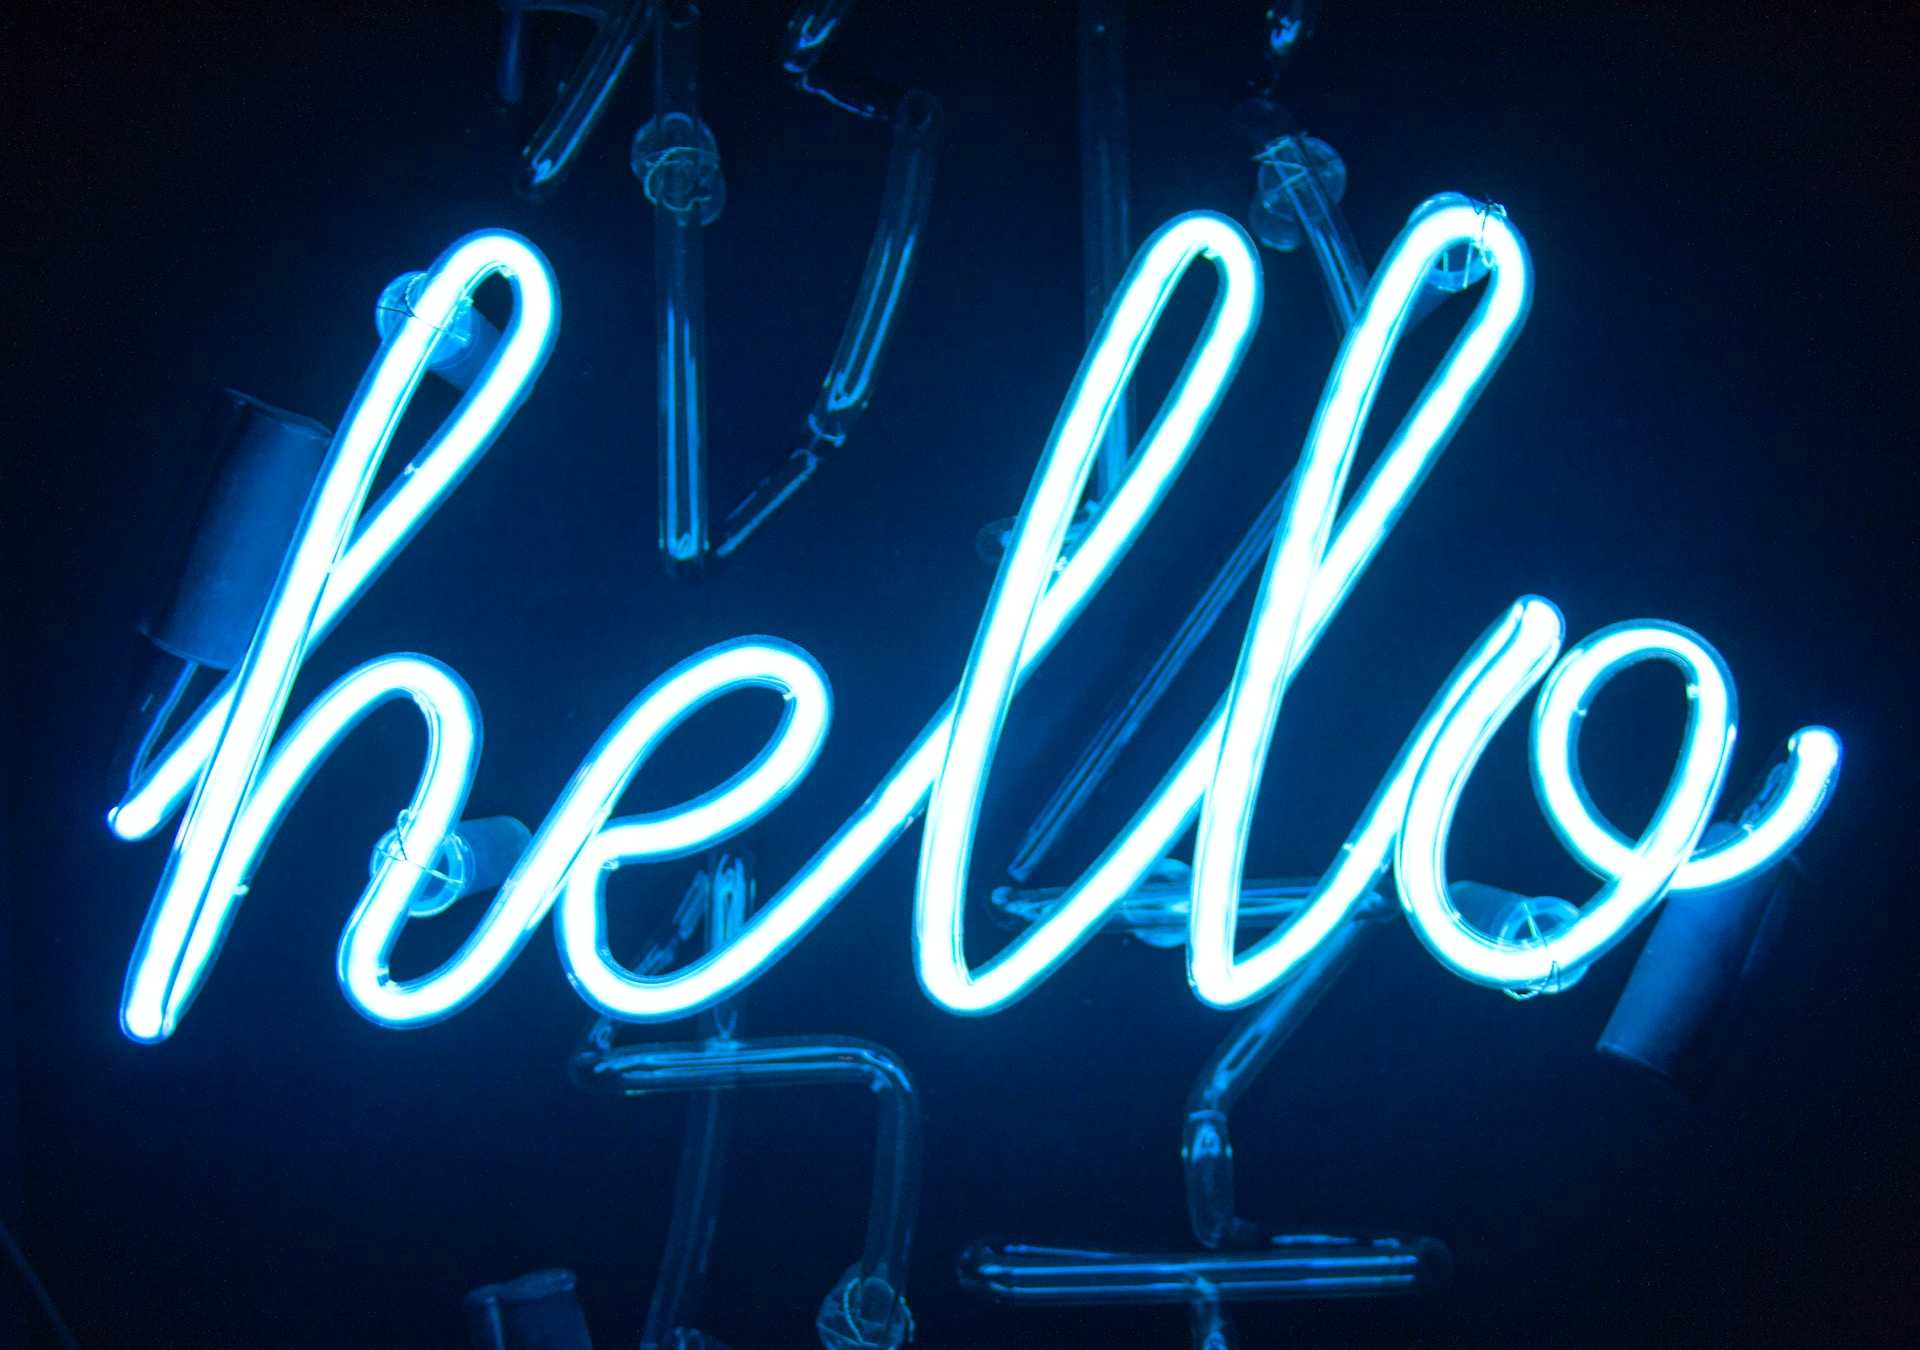 Blue neon sign spelling out hello in a cursive font